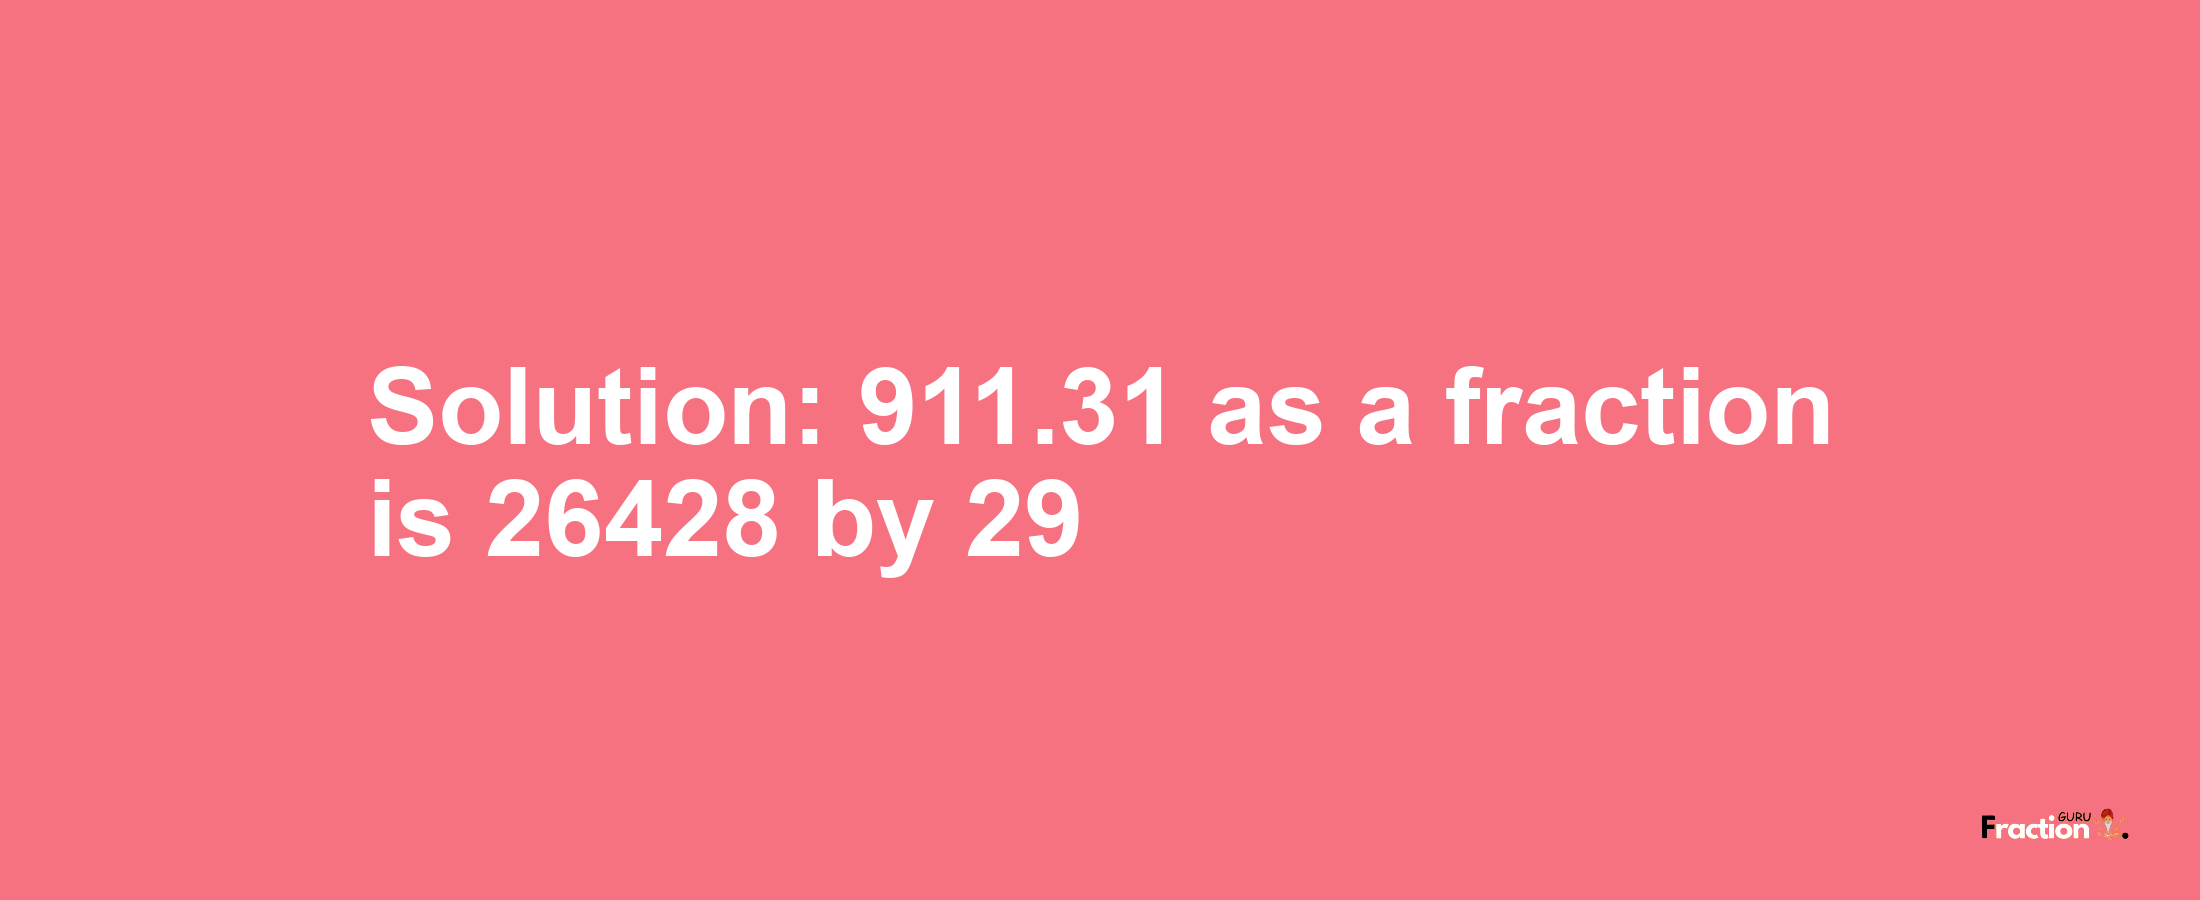 Solution:911.31 as a fraction is 26428/29